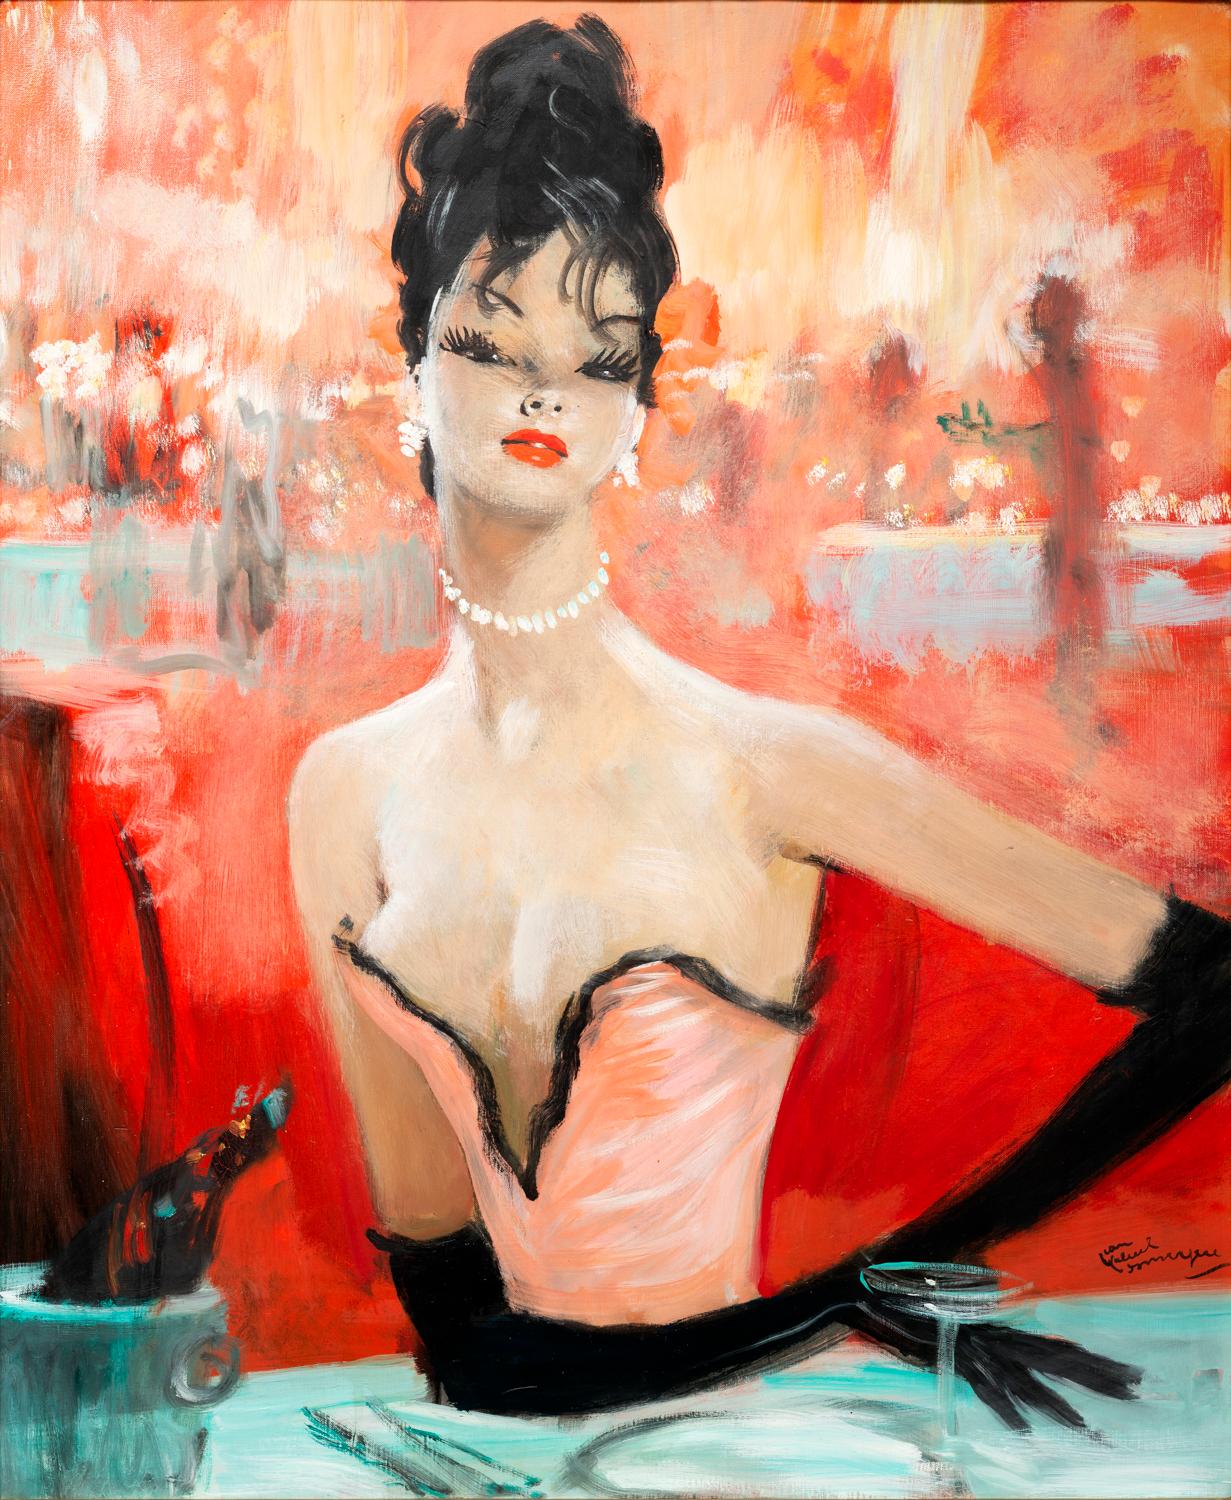 At Maxim's - Painting by Jean-Gabriel Domergue